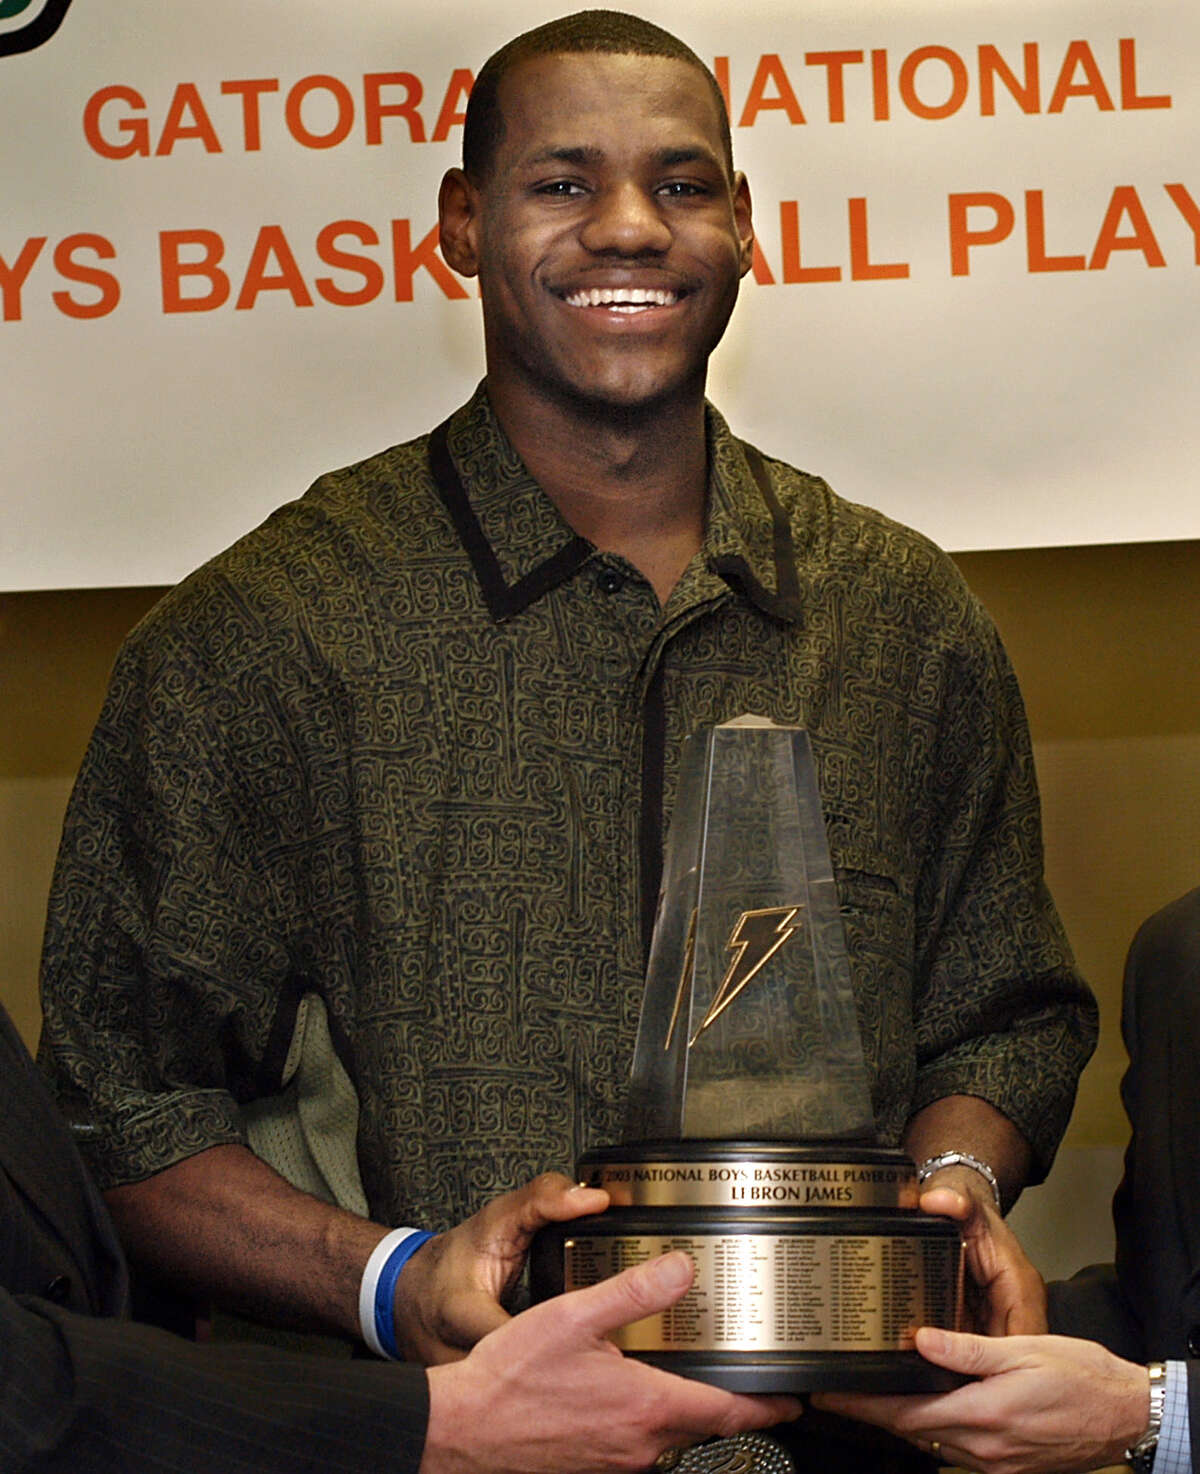 St. Vincent-St. Mary High School's LeBron James holds the award for the 2003 Gatorade National High School Boys Basketball Player of the Year Tuesday, April 8, 2003, in Akron, Ohio. It was the second straight year James has won the award. (AP Photo/Greg Ruffing). Used as mug. HOUCHRON CAPTION (04/13/2003) (05/23/2003) (05/25/2003-2-STAR): James. HOUCHRON CAPTION (06/25/2003): ``I've been selling out gyms since the end of my freshman year, seeing cameras all over the place. Everything that's going on now . . . I'm used to it.'' - Expected NBA draft top pick LeBron James on fame. HOUCHRON CAPTION (02/21/2004) (03/09/2004) (03/17/2004) (04/11/2004) (04/28/2004): James. HOUCHRON CAPTION (11/15/2004) (11/16/2004) (11/25/2004) (11/28/2004) (12/14/2004) (12/16/2004) (12/17/2004-2-STAR) (12/22/2004) (12/29/2004) (01/17/2005 -2-star) (02/04/2005) (02/06/2005-3-STAR) (02/17/2005) (02/24/2005) (03/21/2005-2-STAR) (04/16/2005) SECSPTS: JAMES.